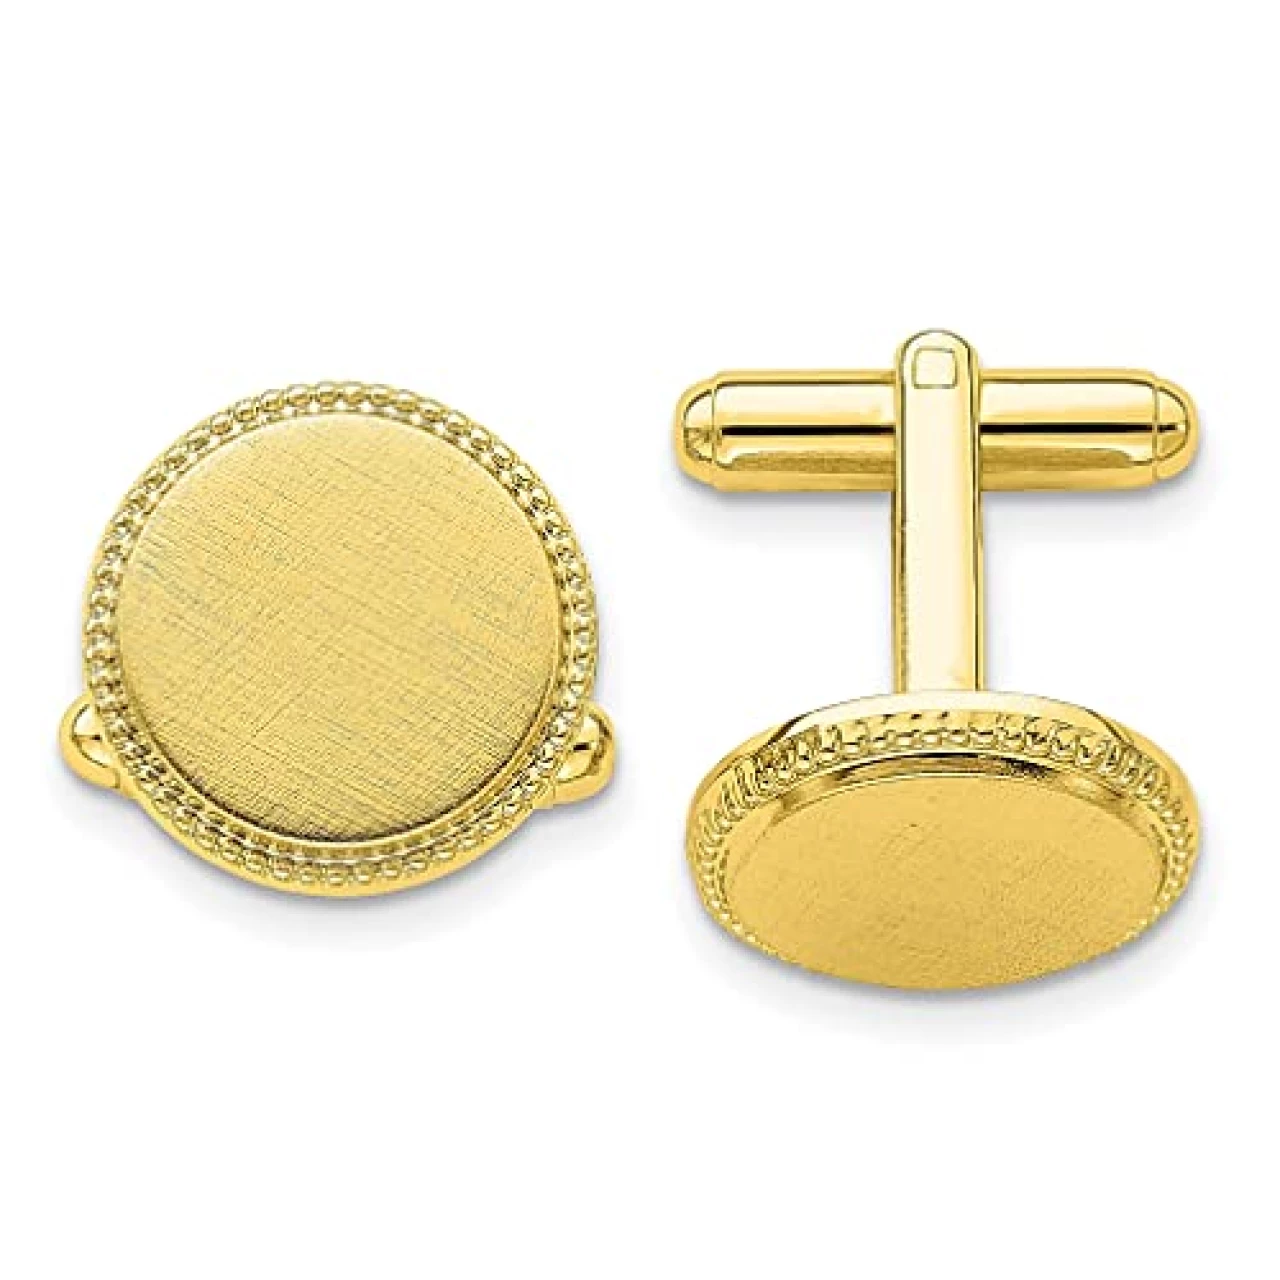 ICE CARATS Kelly Waters Gold Plated Florentine Round Beaded Cuff Links Mens Cufflinks Link Collar Stay Fashion Jewelry for Dad Mens Gifts for Him